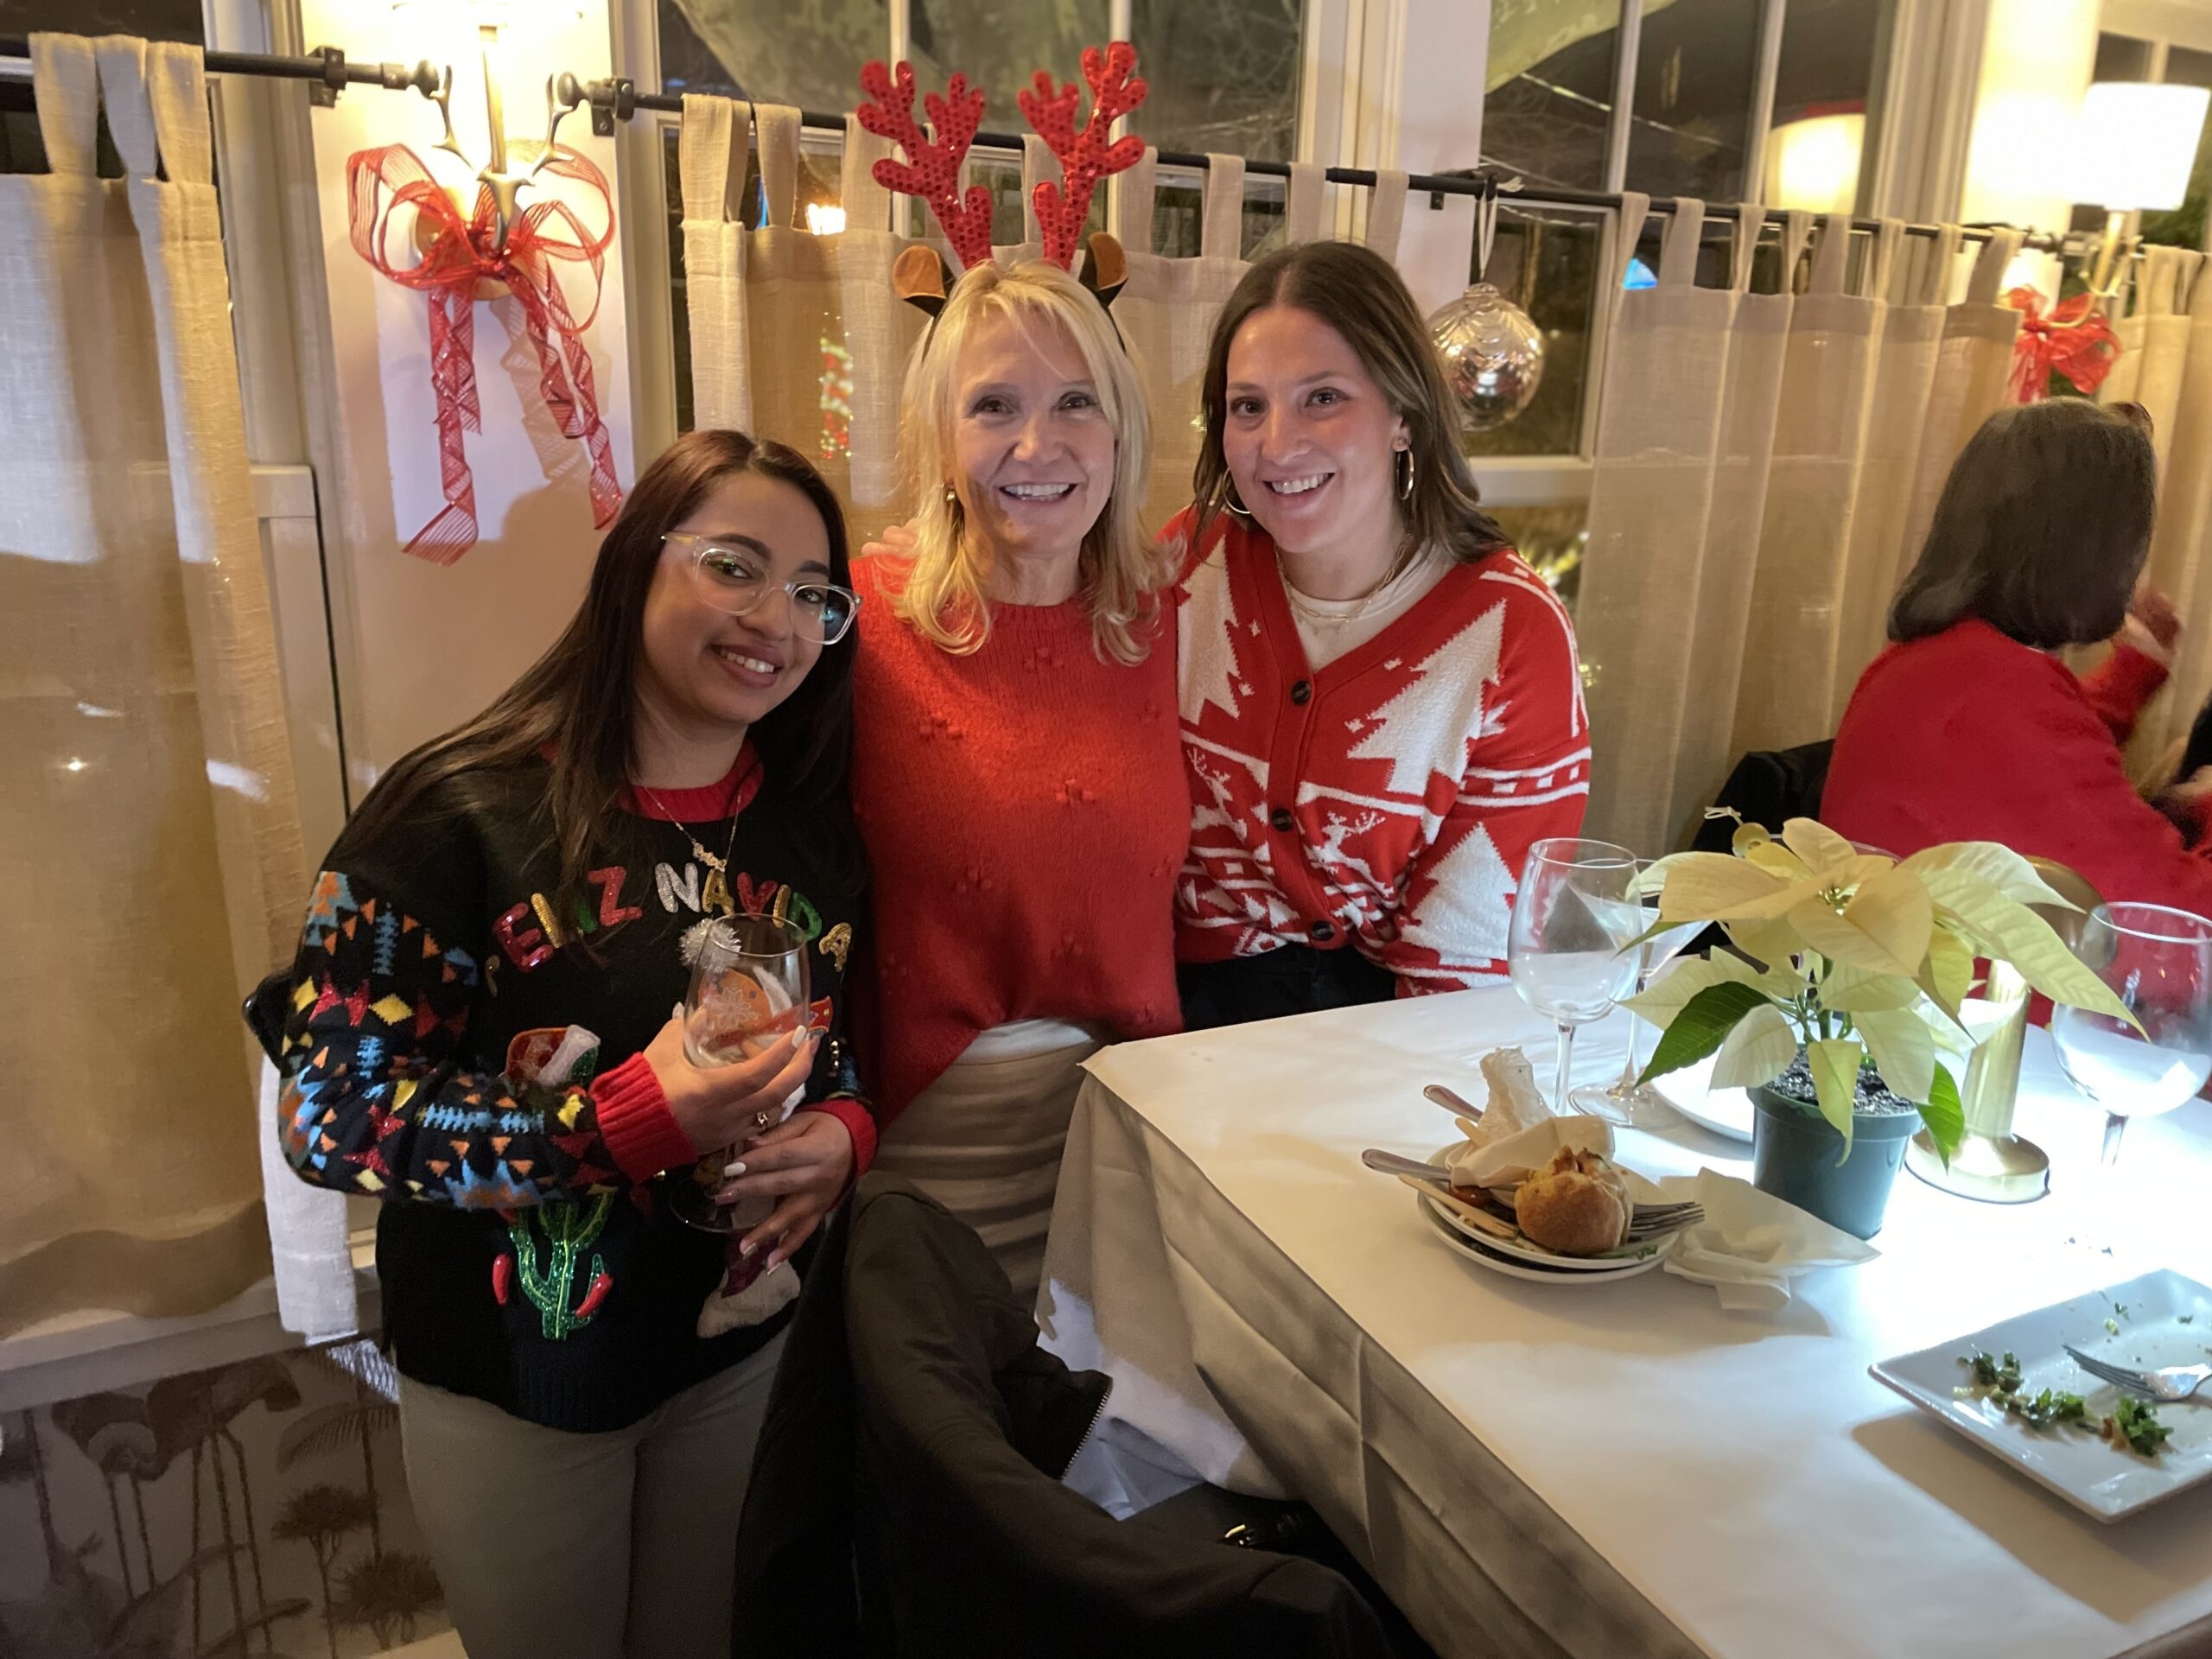 Scenes from the East End Women's Network's ugly sweater party last year. COURTESY KATHERINE PIERRO